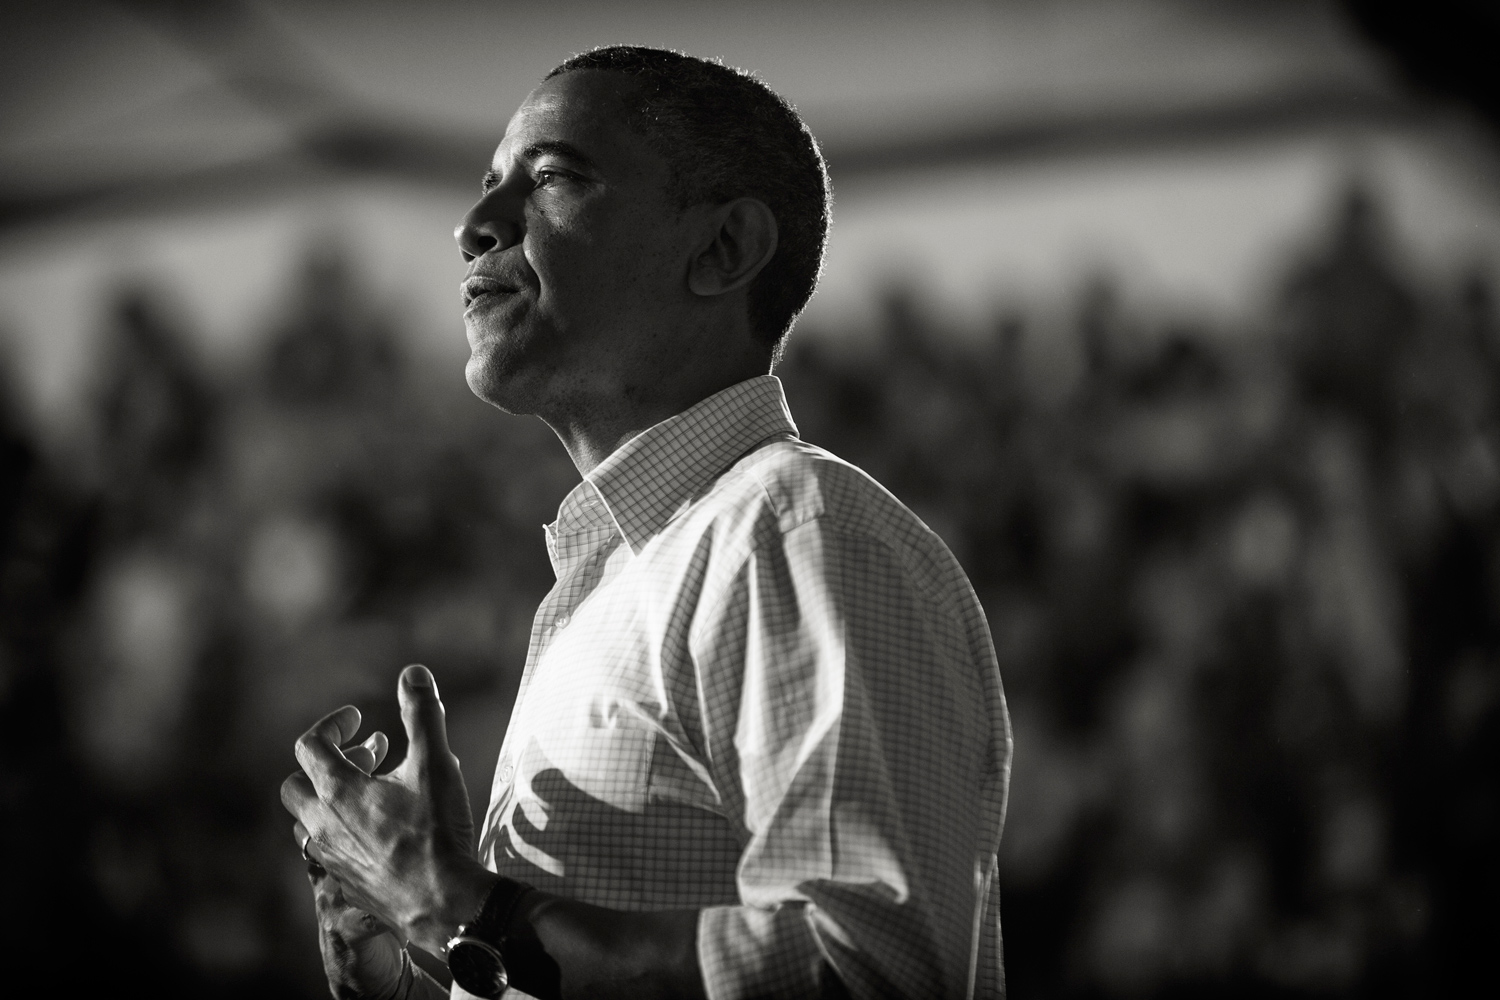 Image: Nov. 3, 2012. President Obama attends a campaign rally at the Mentor High School in Mentor, Ohio.